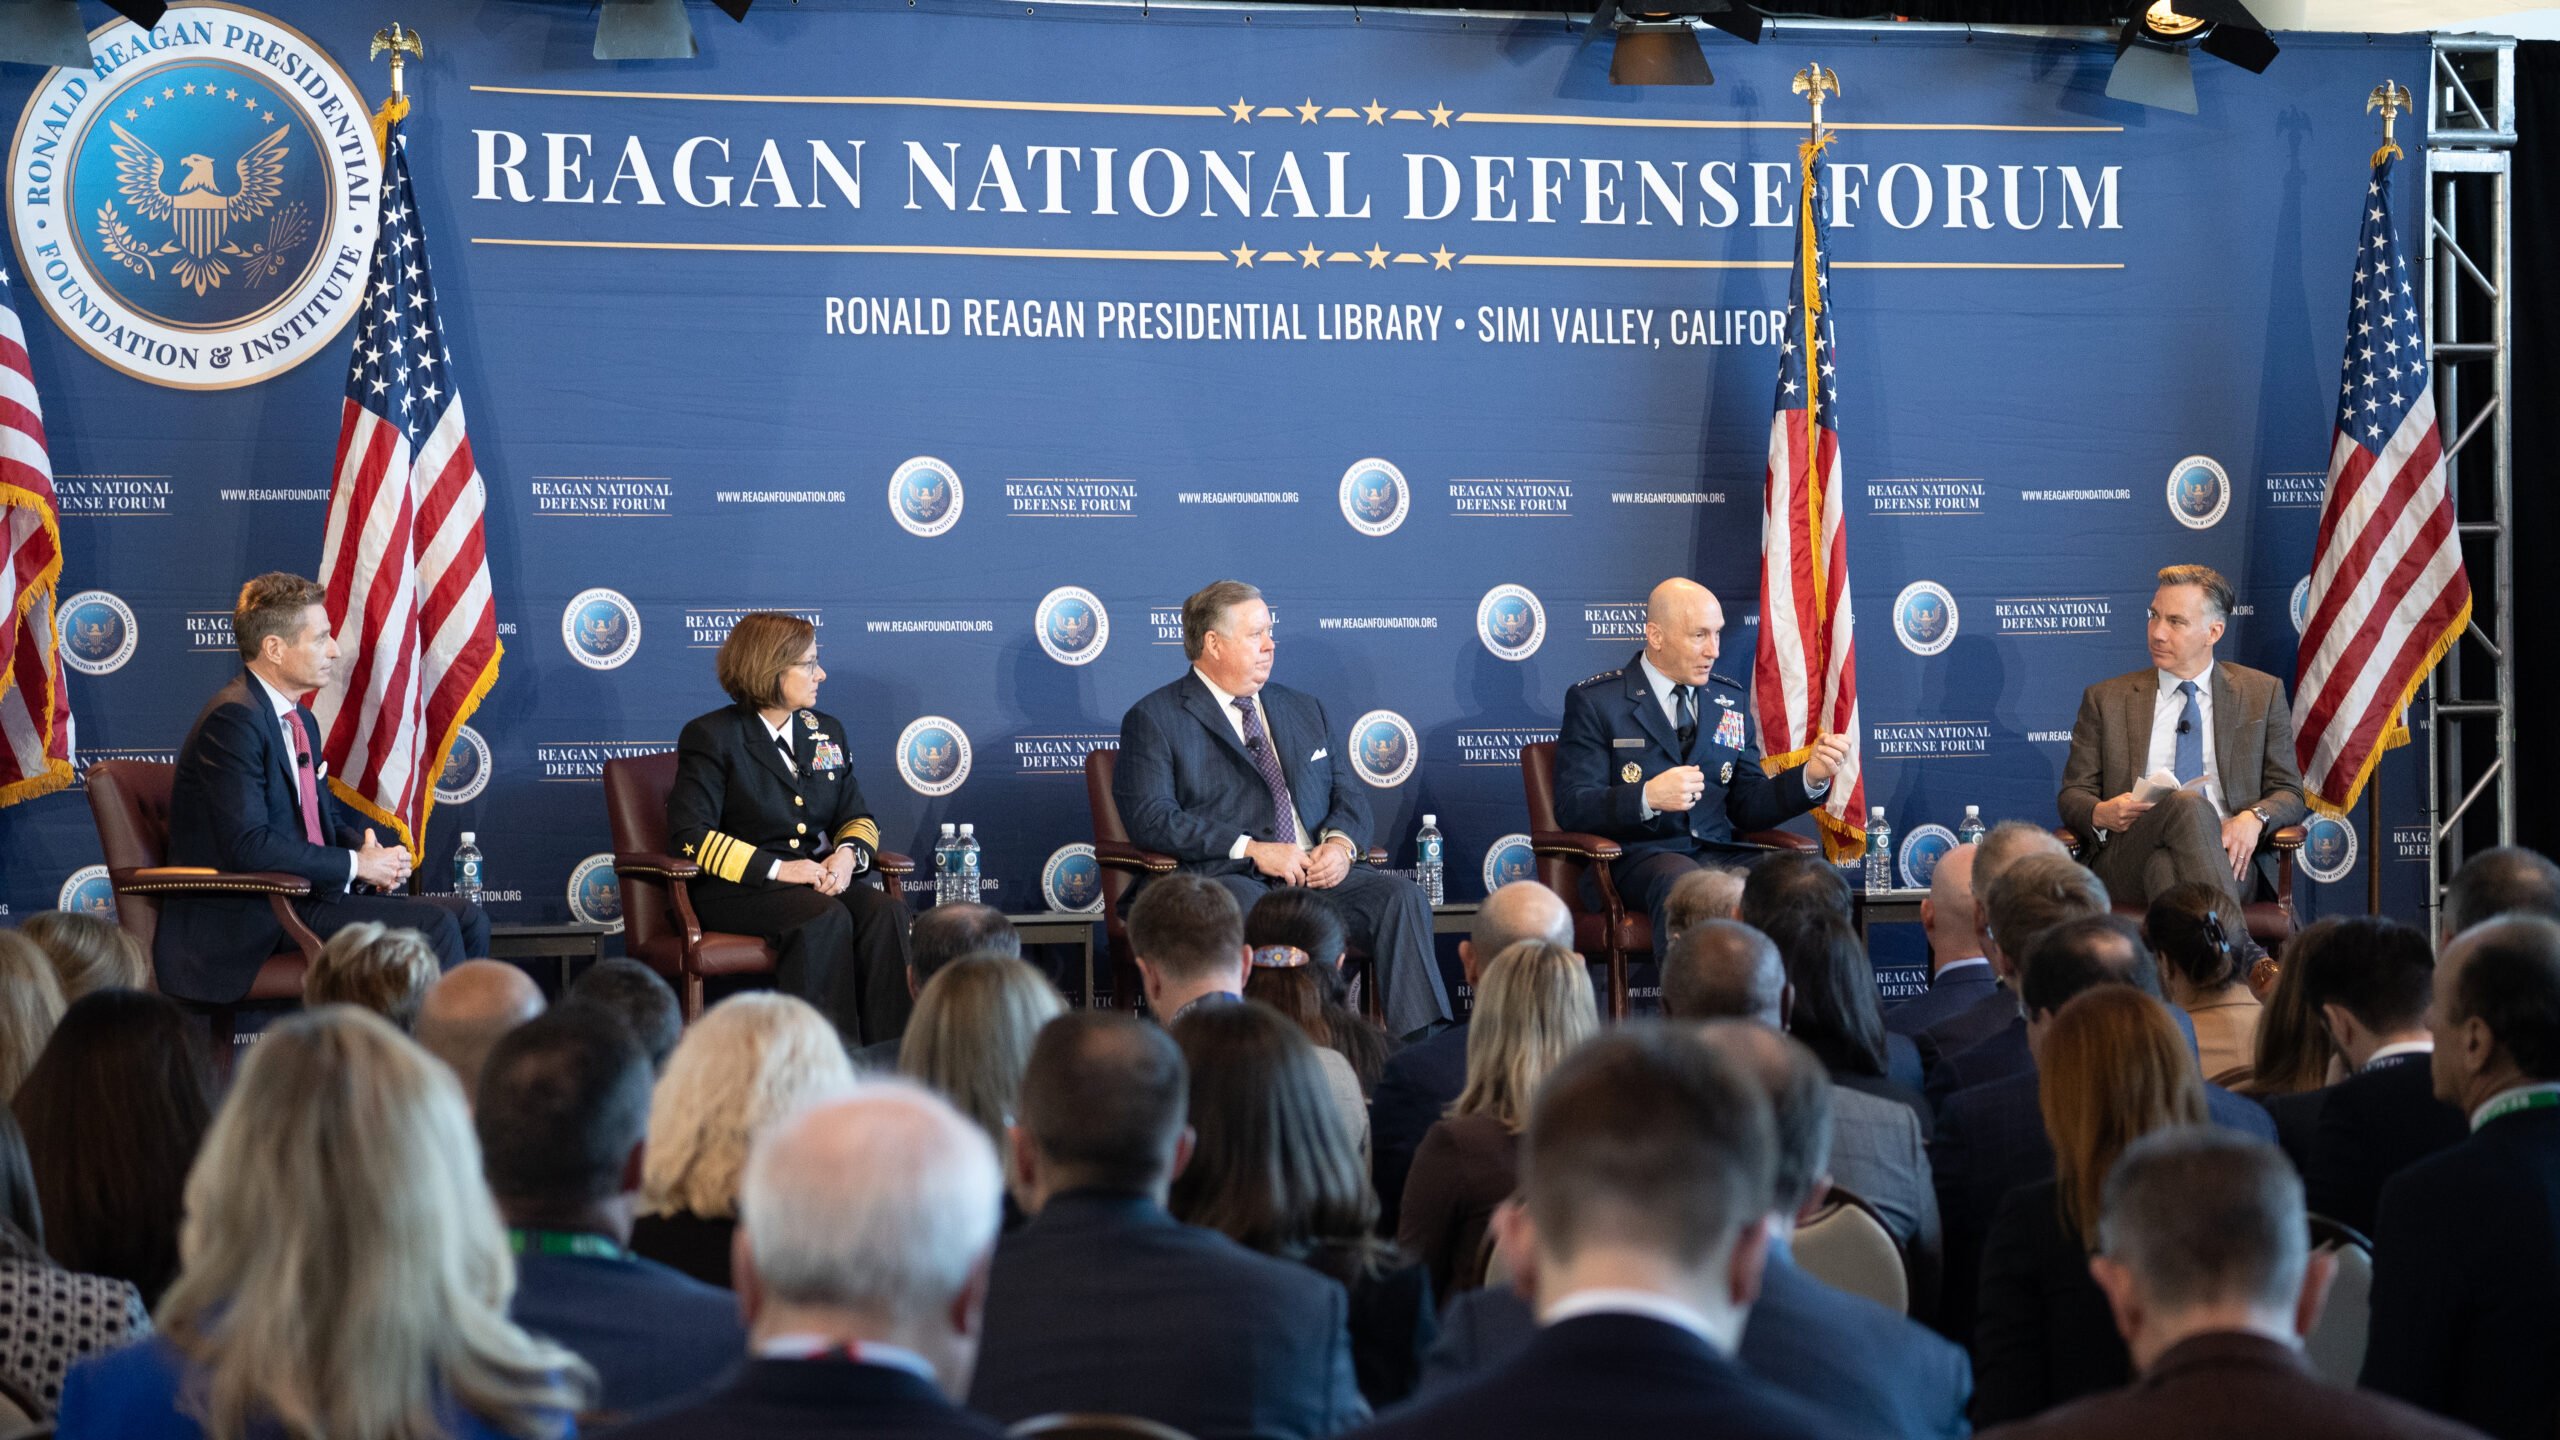 Good news for allies, questions on AI at Reagan National Defense Forum [VIDEO]